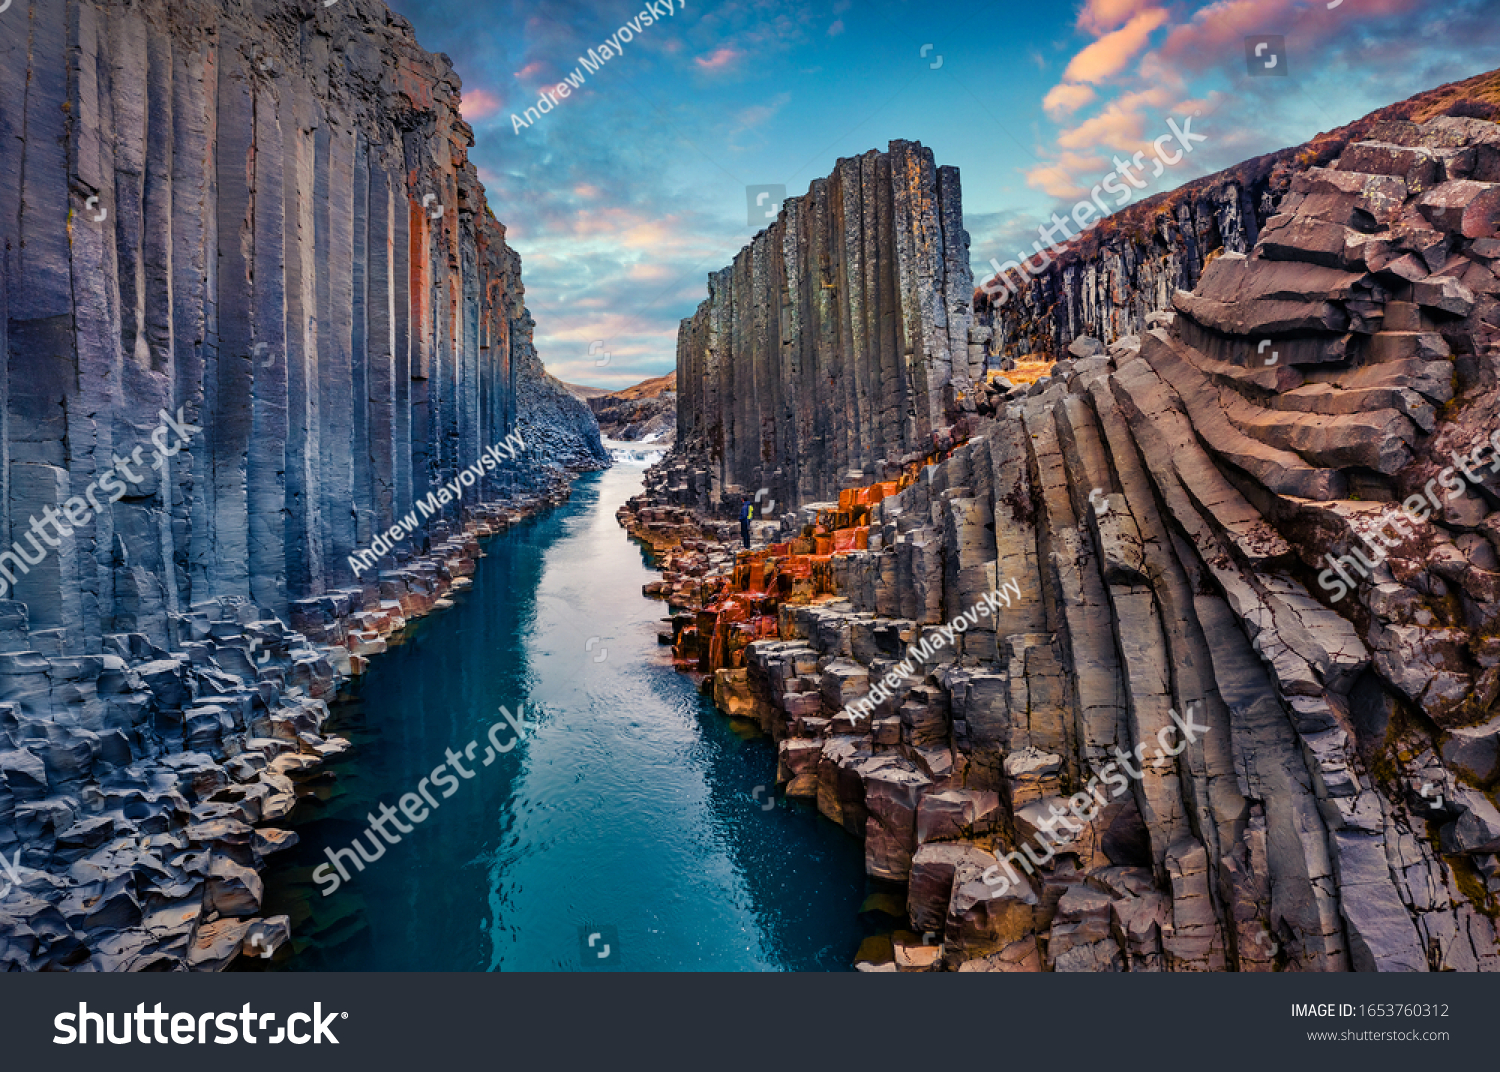 Fantastic summer sunset on Studlagil Canyon. Incredible evening view ofJokulsa A Bru river. Superb outdoor scene of Iceland, Europe. Beauty of nature concept background. #1653760312